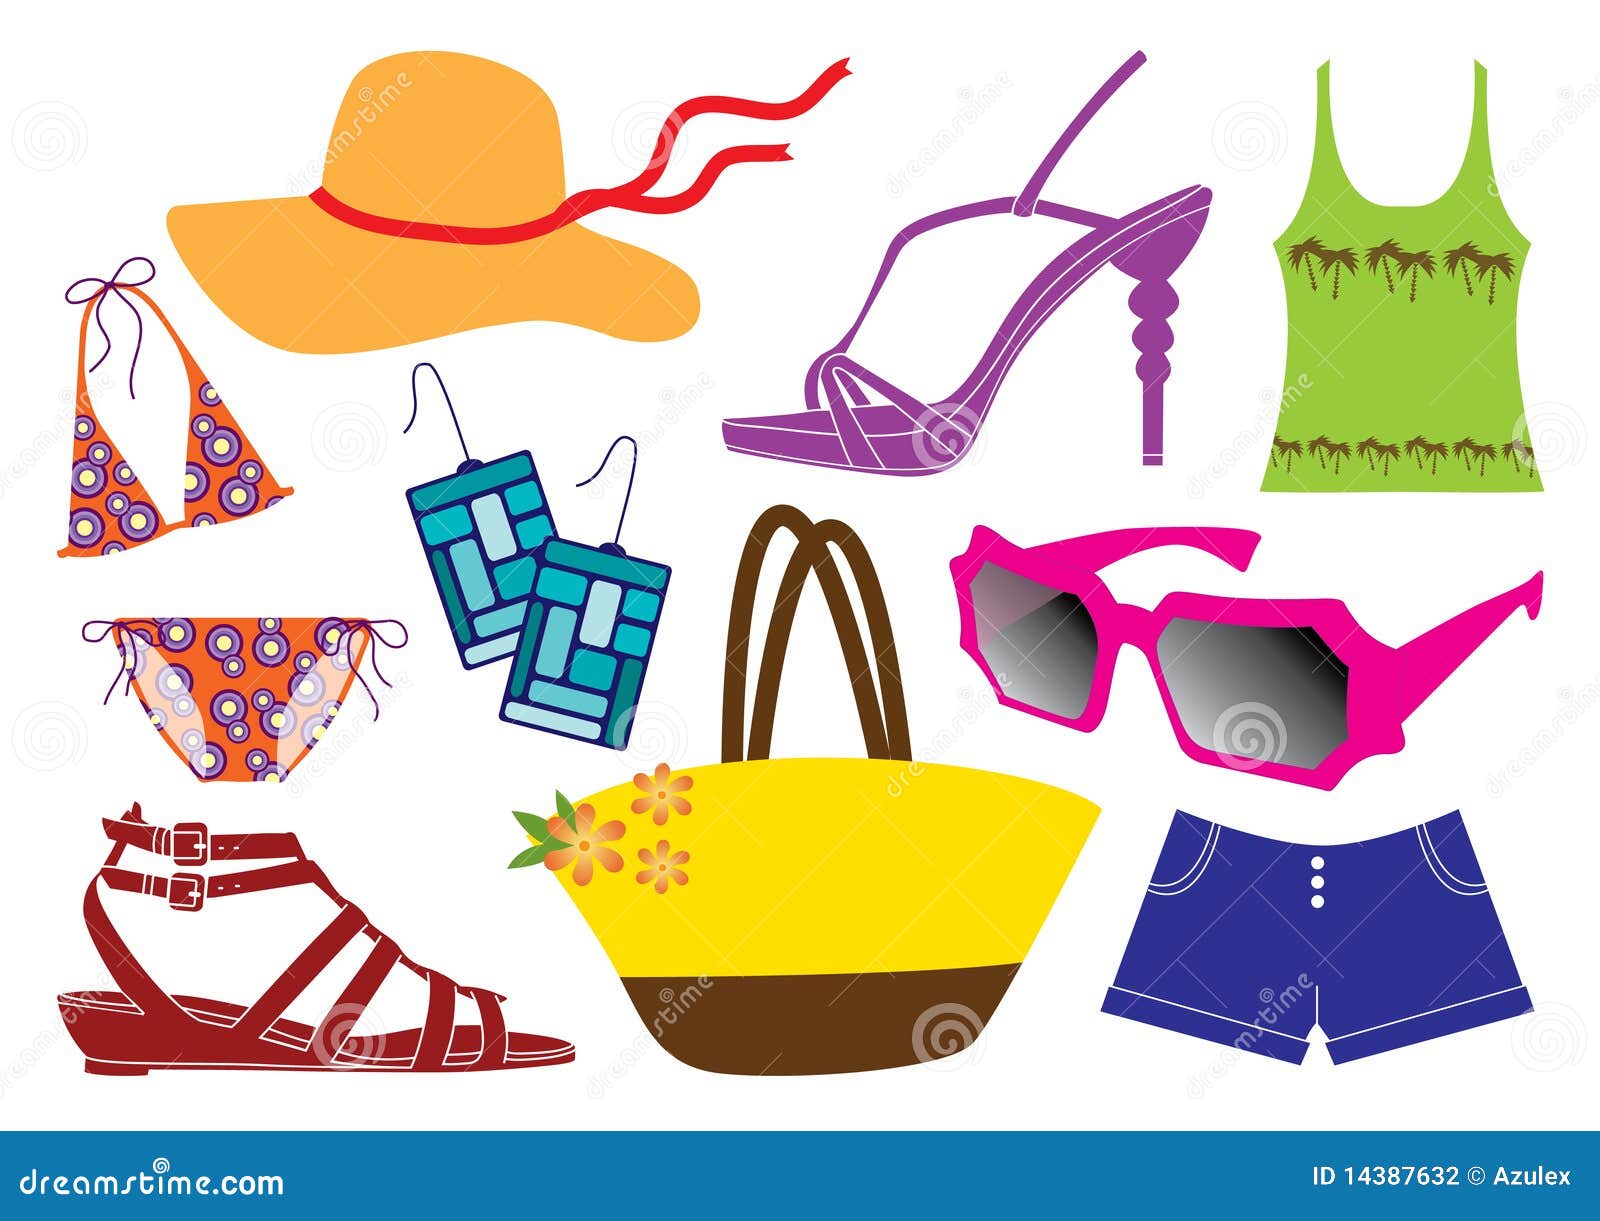 summer clothes clipart images - photo #11